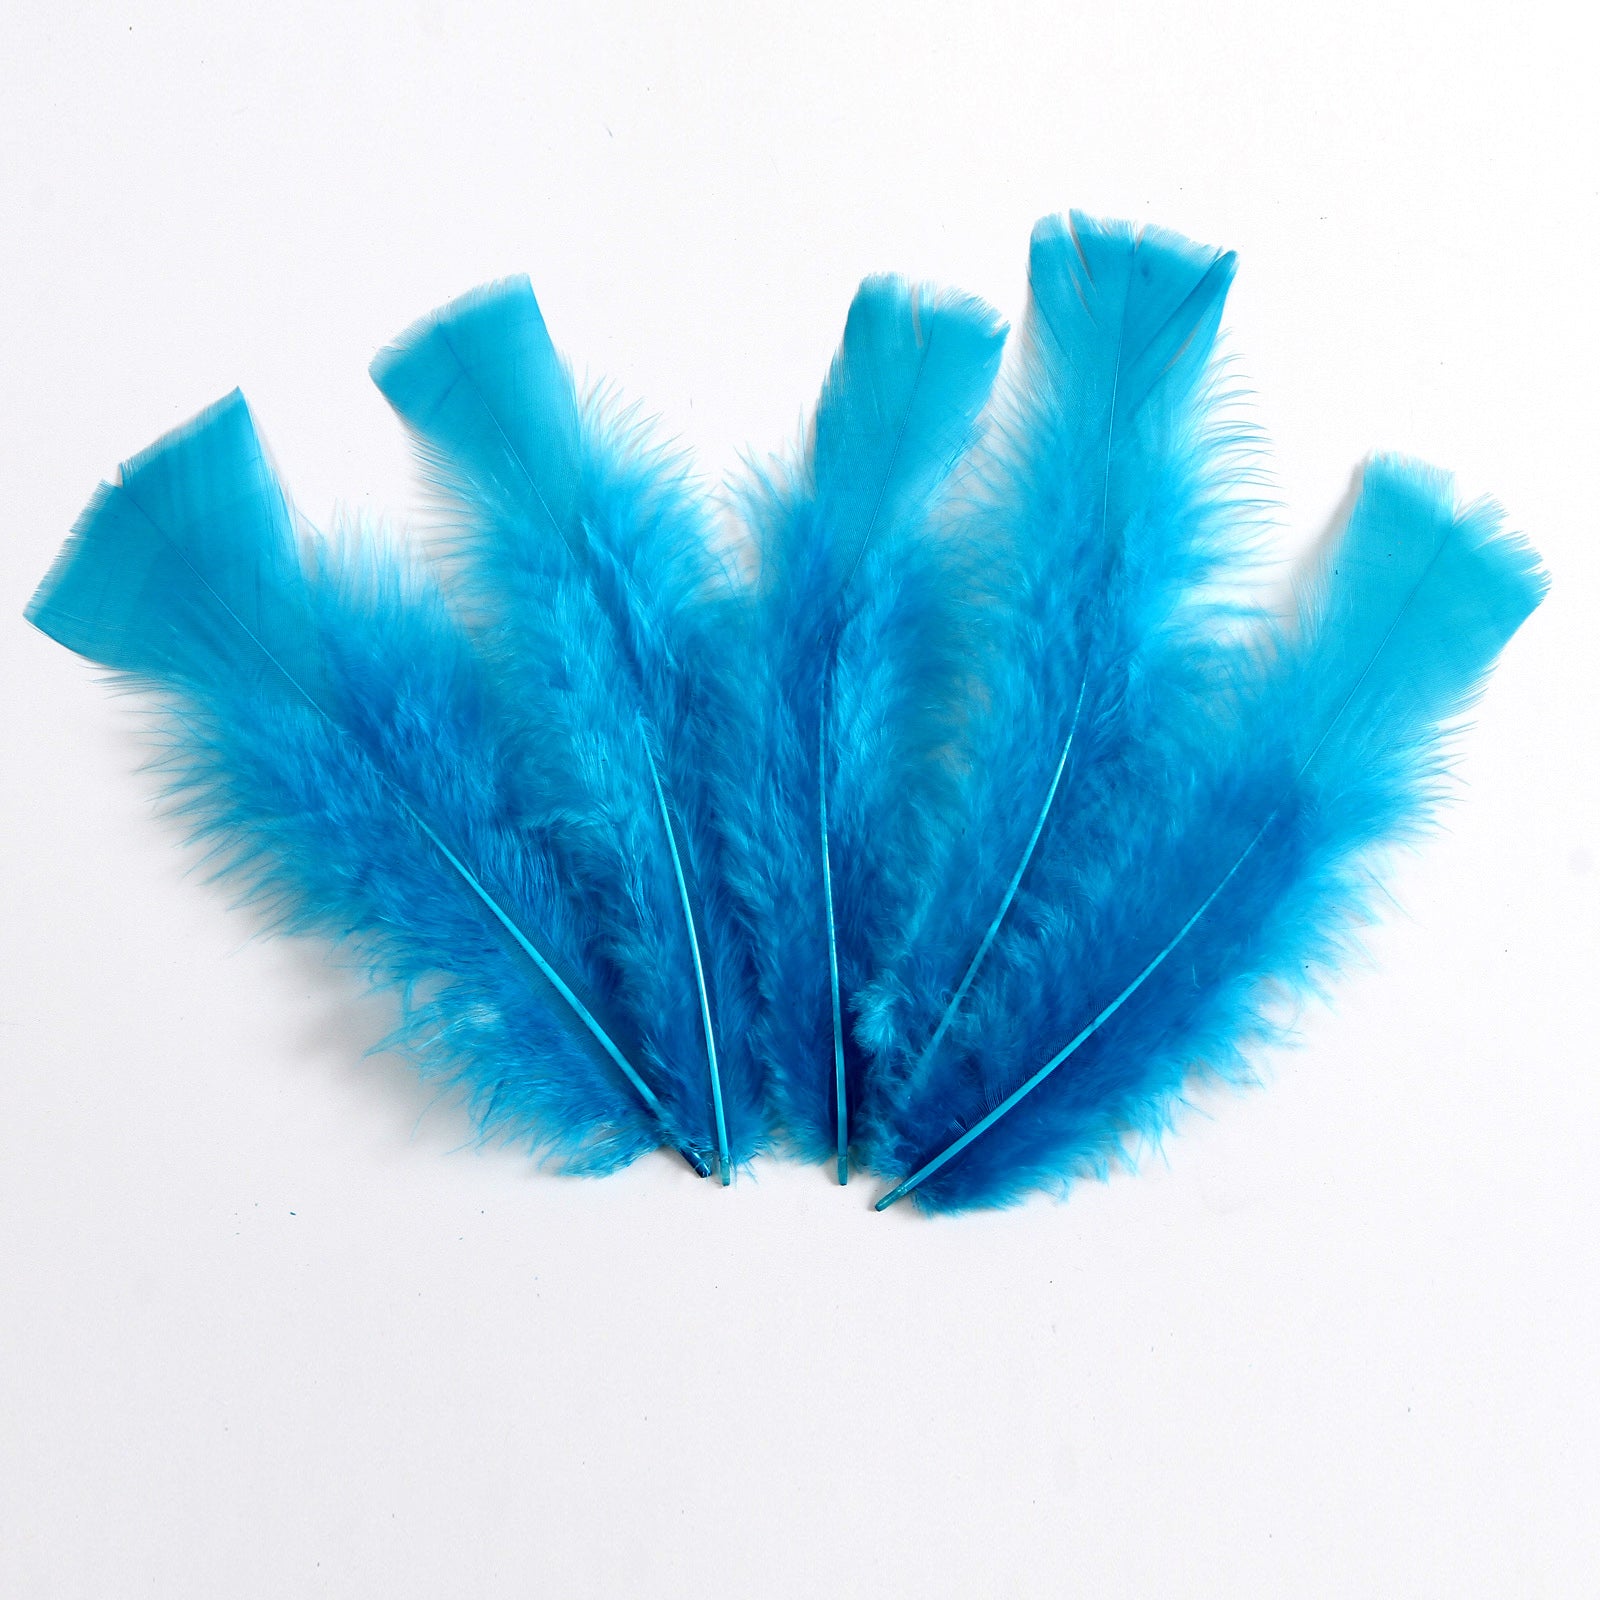 Blue Turkey Plumage (flats) Craft Feathers per Ounce from Lamplight Feather  package